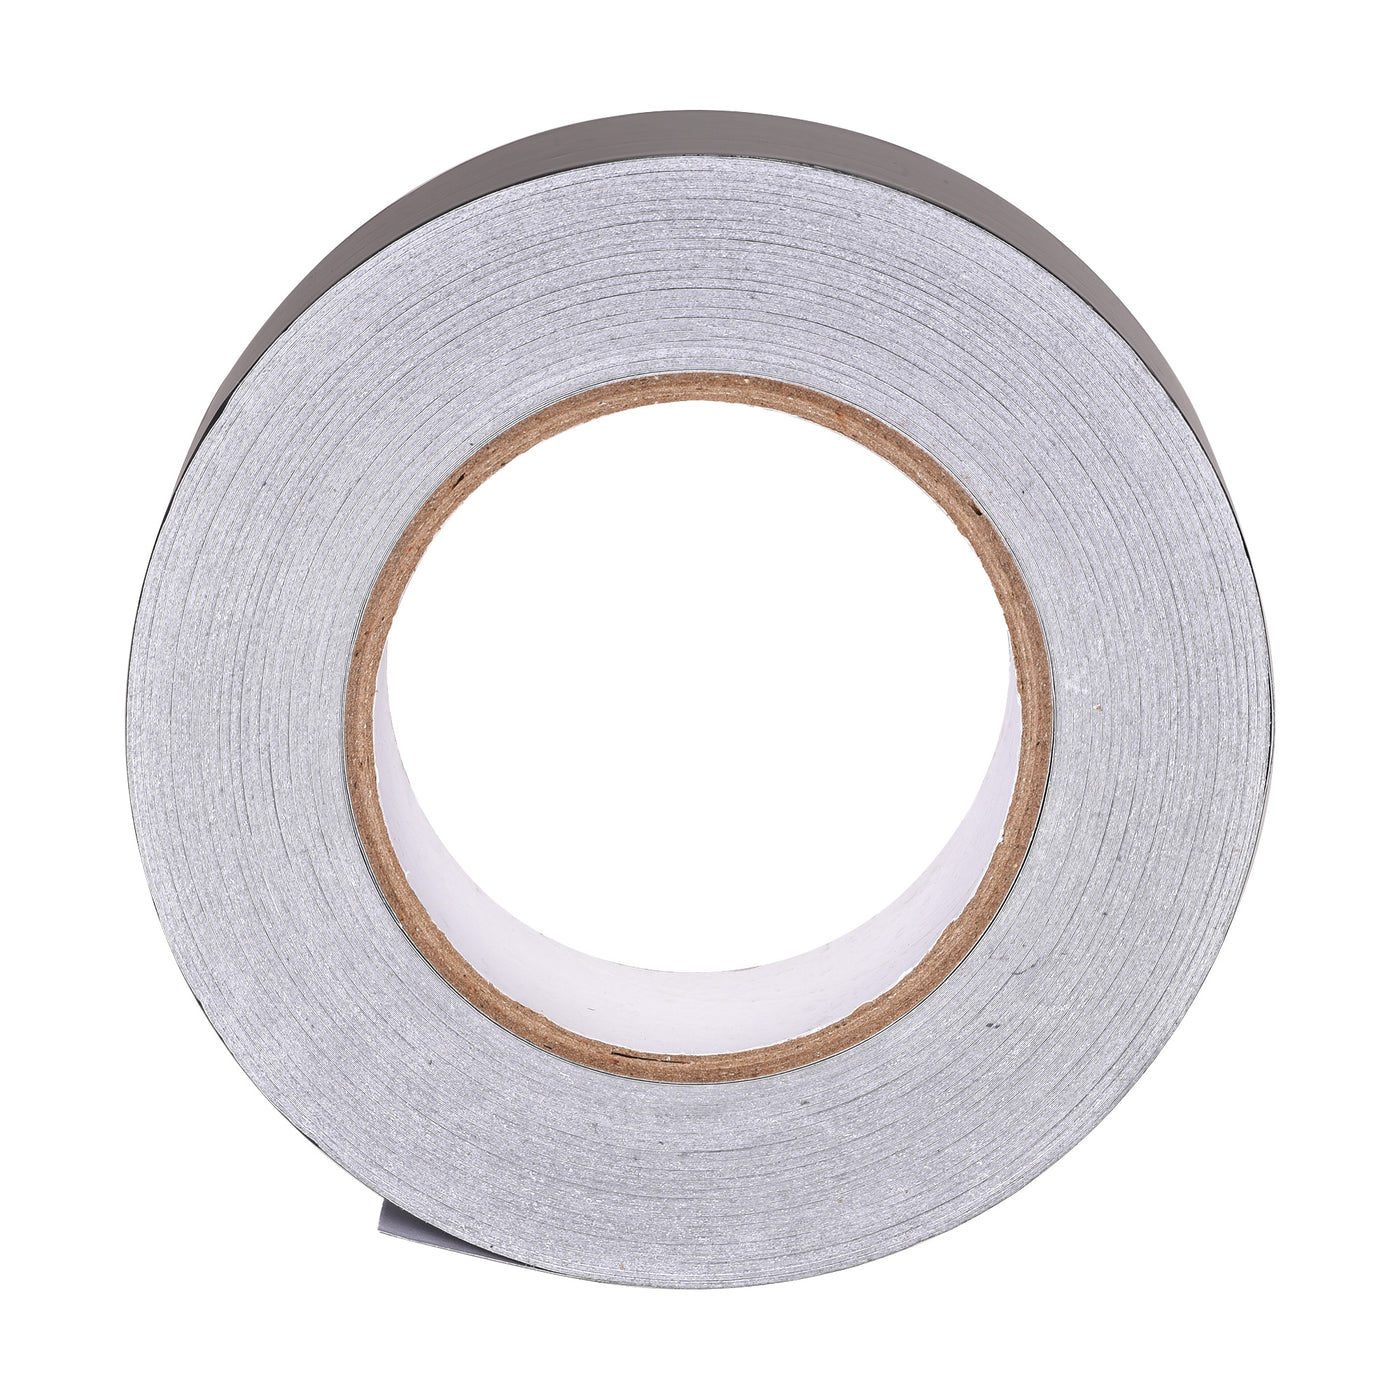 uxcell Uxcell 20mm Aluminum Foil Tape for HVAC, Patching Hot and Blocking Light 50m/164ft 2pcs